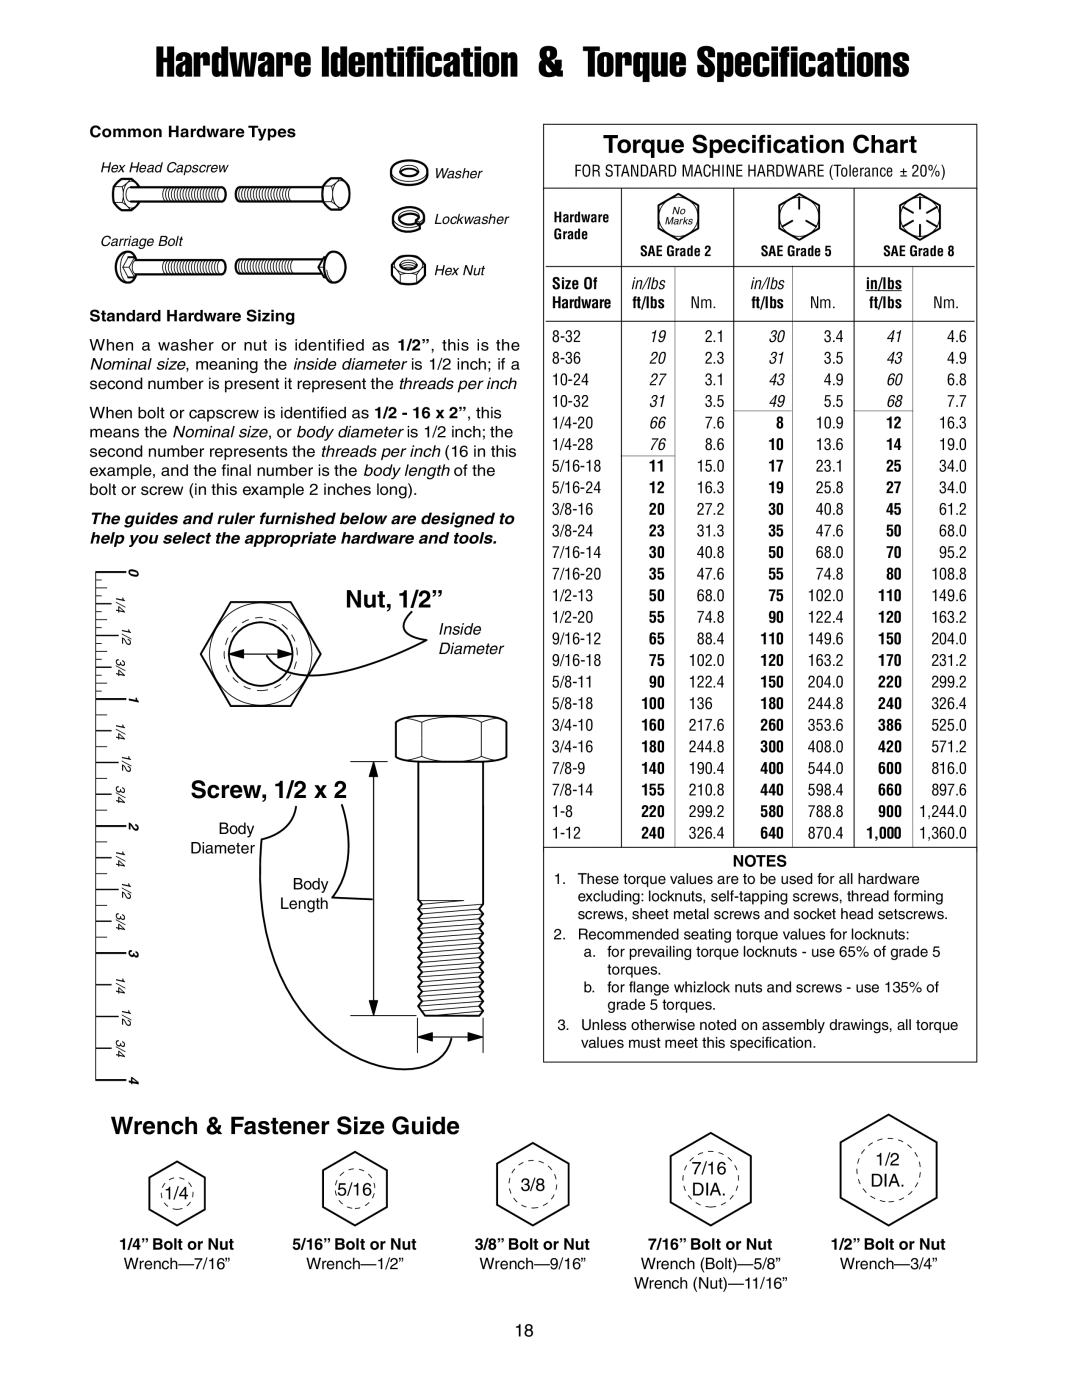 Simplicity 1692149 Torque Specification Chart, Wrench & Fastener Size Guide, Nut, 1/2”, Screw, 1/2 x, 1/4” Bolt or Nut 